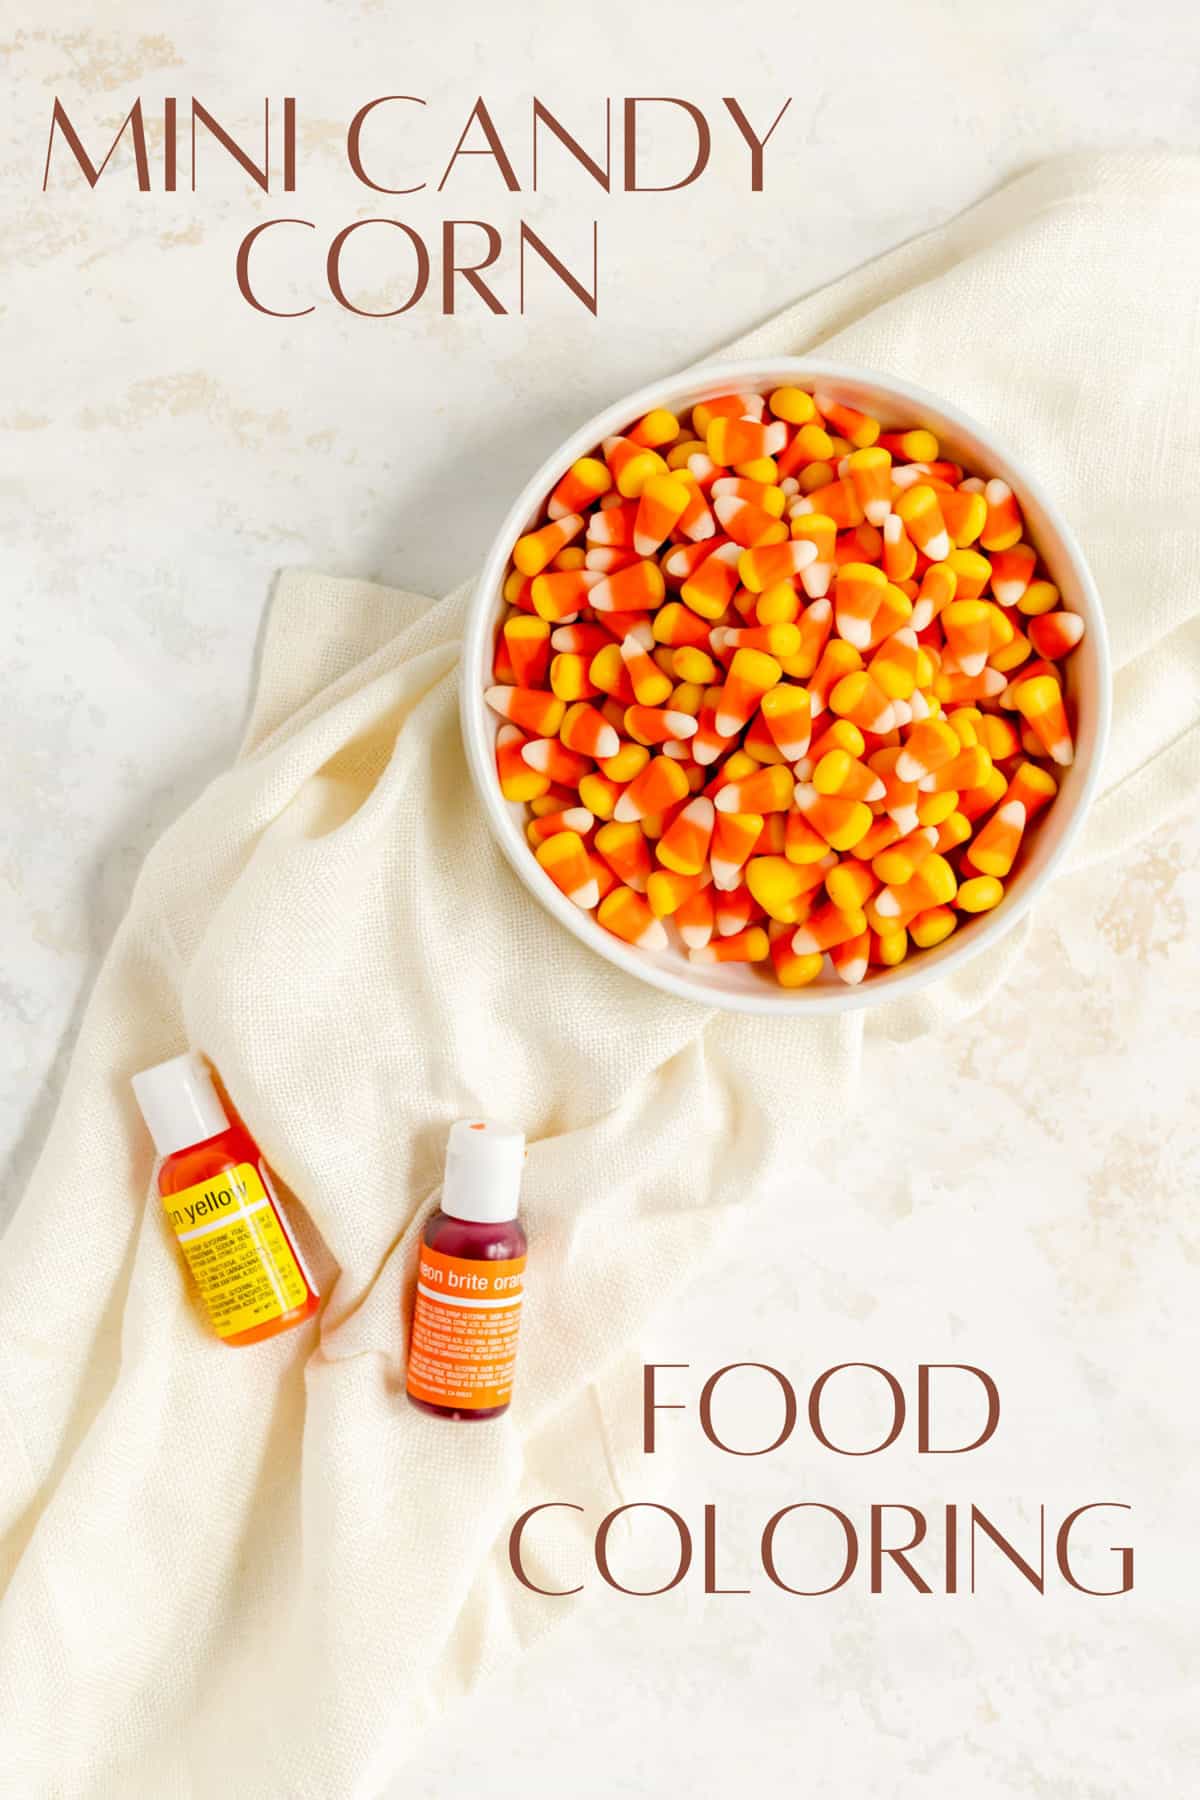 a bowl of mini candy corns and bottles of yellow and orange food coloring on white background